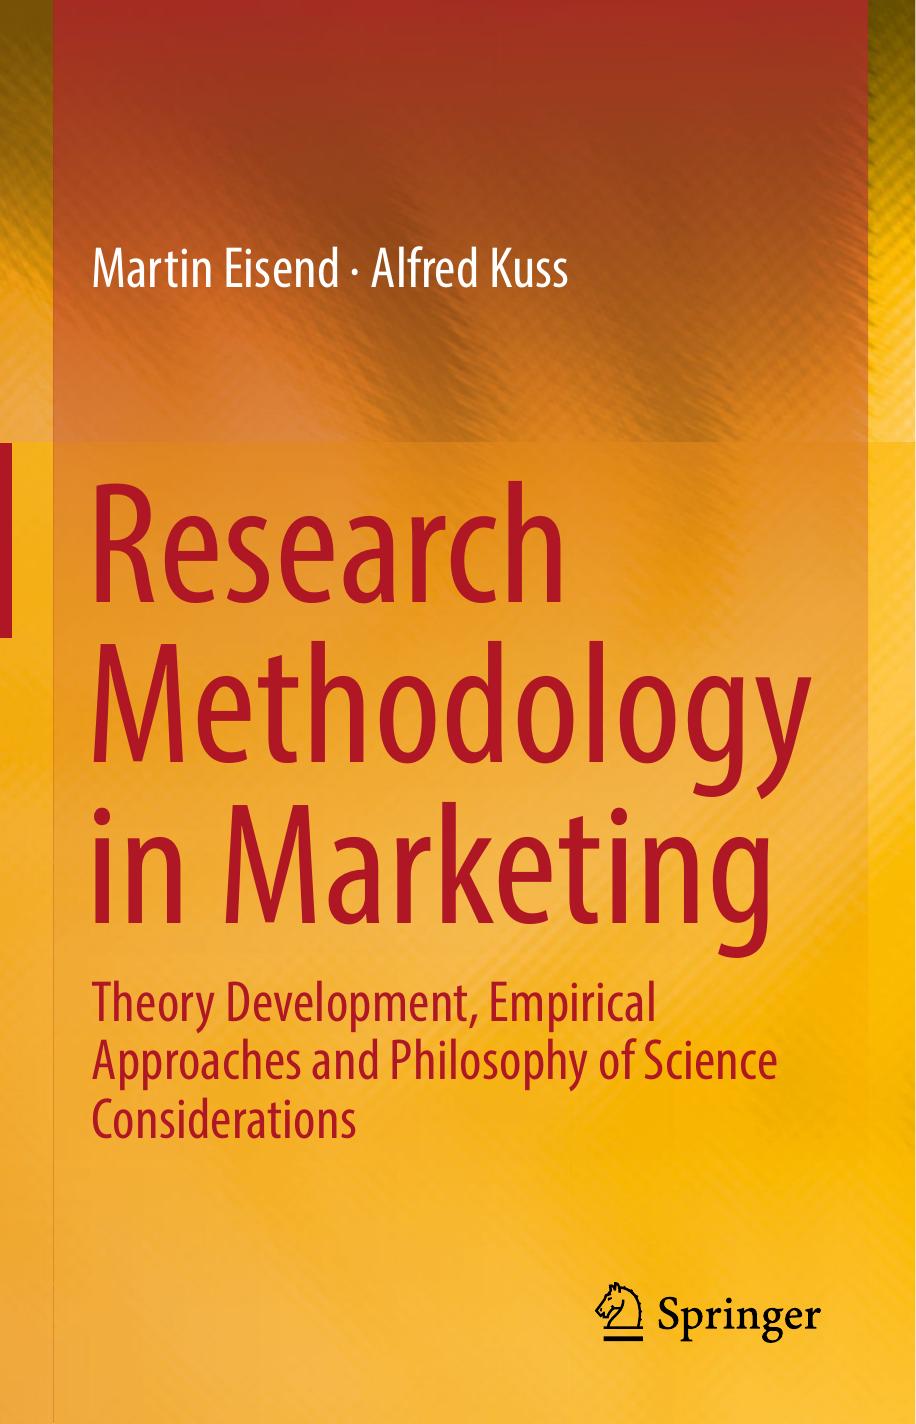 Research Methodology in Marketing: Theory Development, Empirical Approaches and Philosophy of Science Considerations